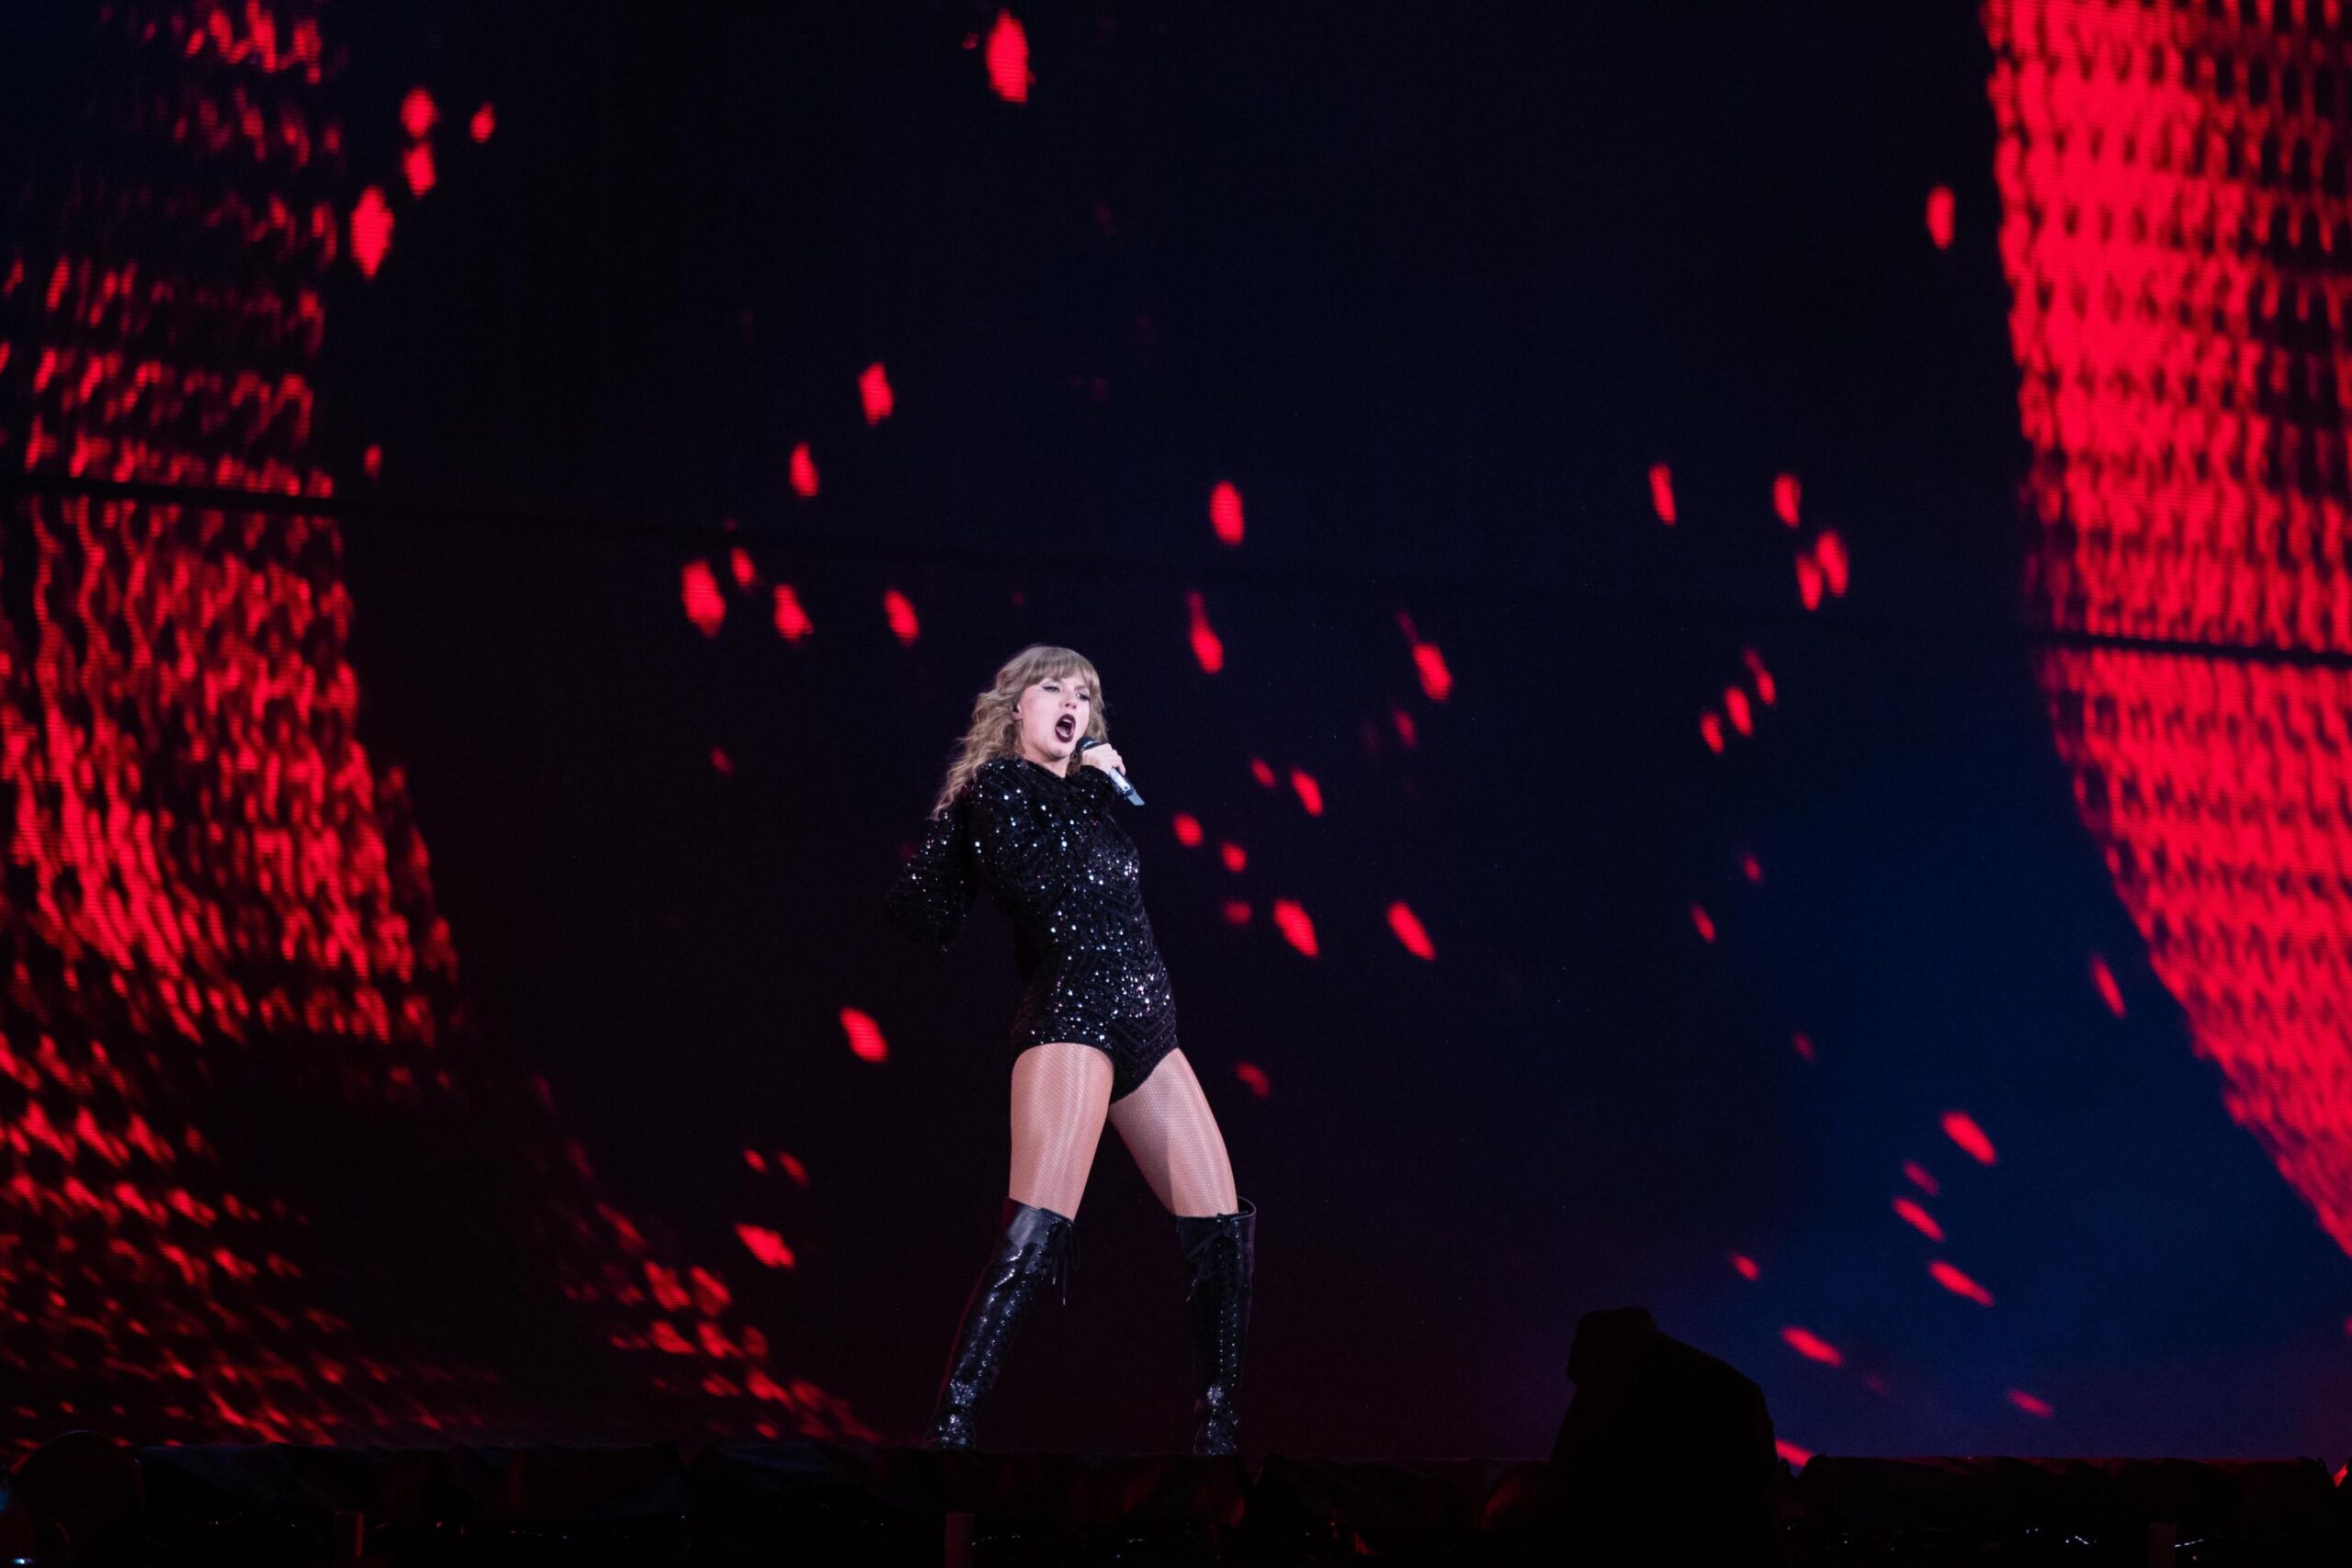 epa07104759 US Pop singer-songwriter Taylor Swift is seen onstage during a live performance at Optus Stadium, Perth, Australia, 19 October 2018. The concert is part of Swift's 'Reputation Stadium Tour'.  EPA/RICHARD WAINWRIGHT  AUSTRALIA AND NEW ZEALAND OUT  EDITORIAL USE ONLY  EDITORIAL USE ONLY